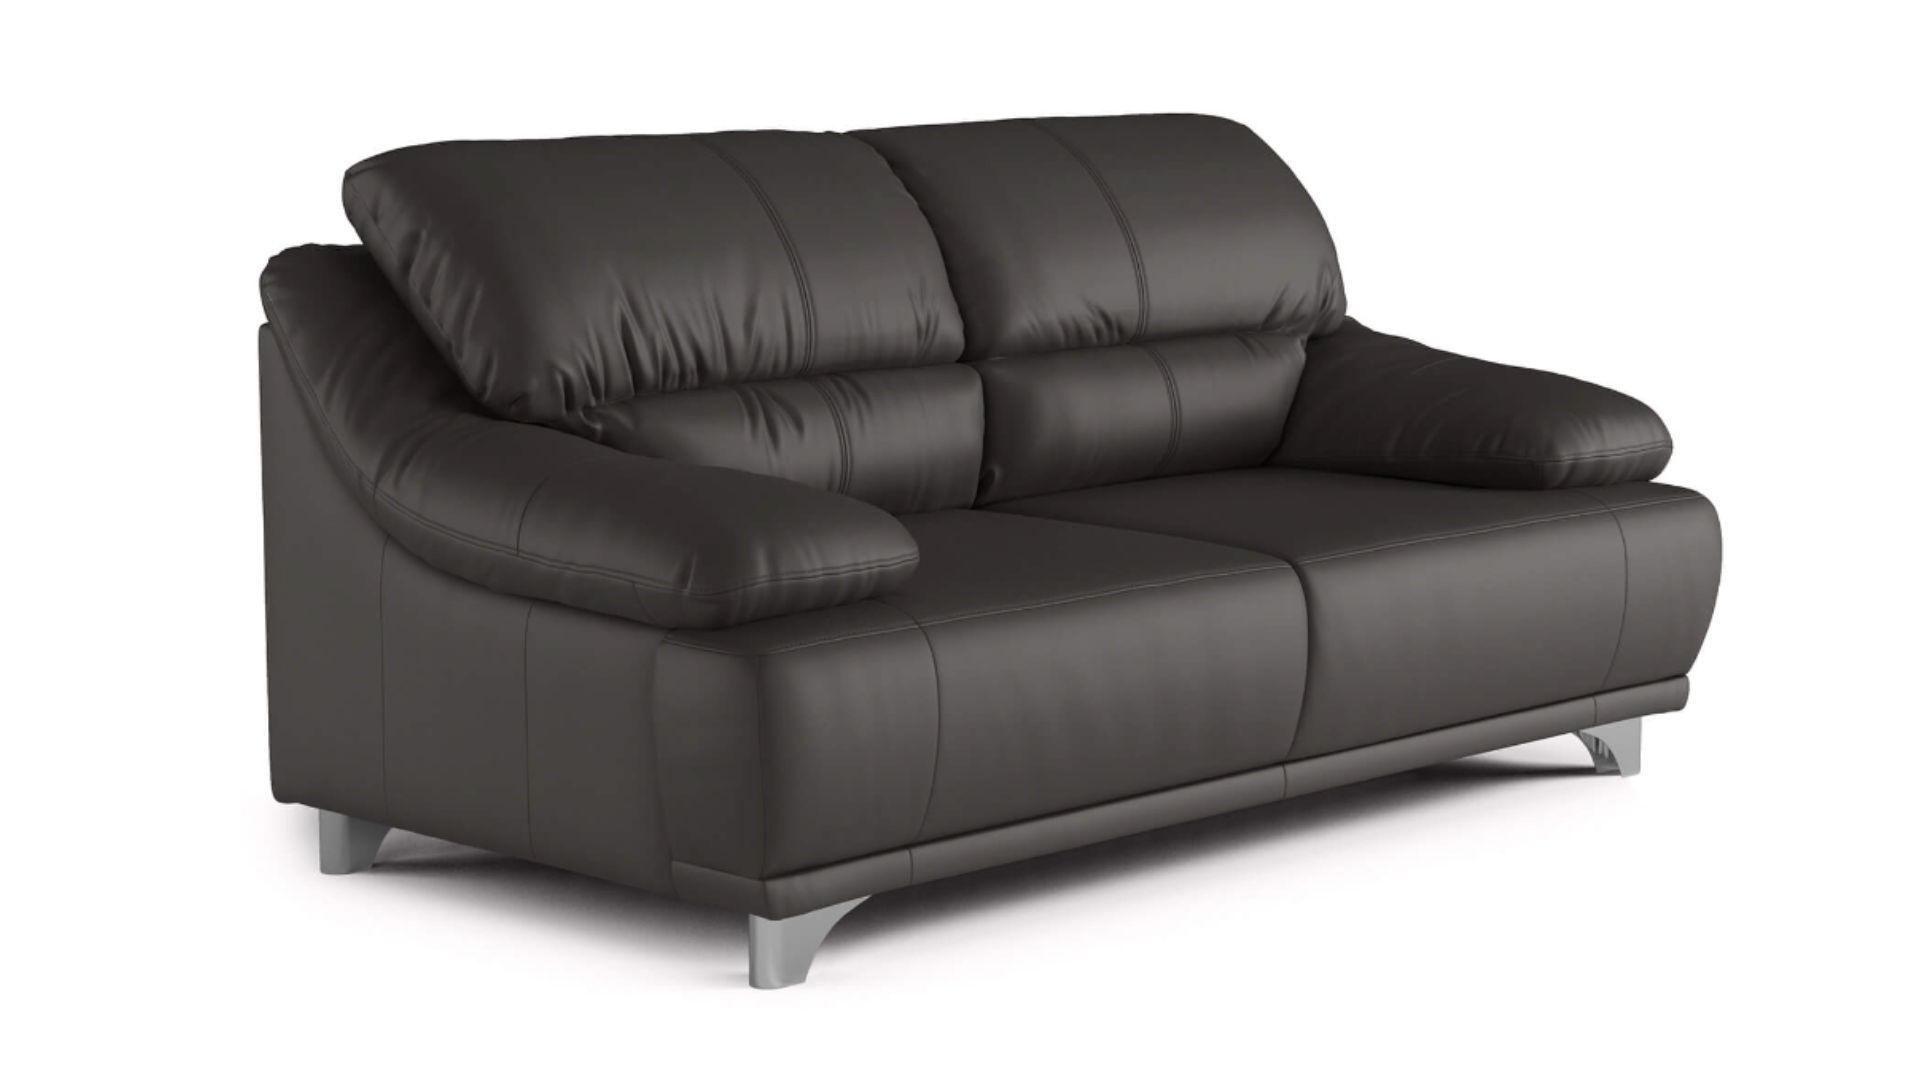 Professional 3D Modeling for a Black Sofa